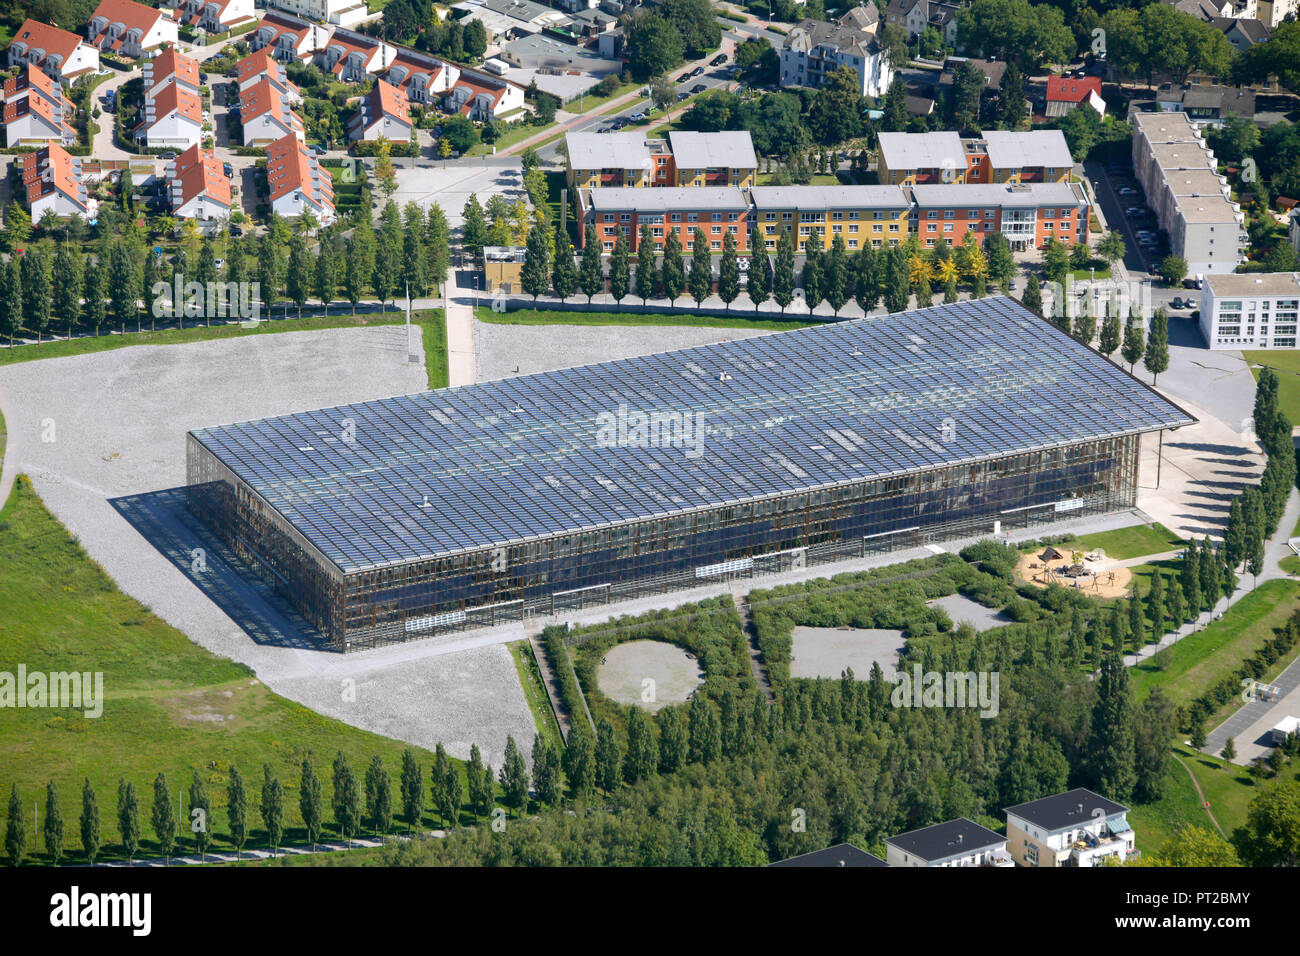 Aerial photo, solar academy Mont Cenis, Herne-Sodingen, Europe's largest solar roof, solar panels, renewable energy, event center, hotel, aerial view, ASB meeting and care center Mont-Cenis, Herne, Ruhr area, North Rhine-Westphalia, Germany, Europe, Stock Photo